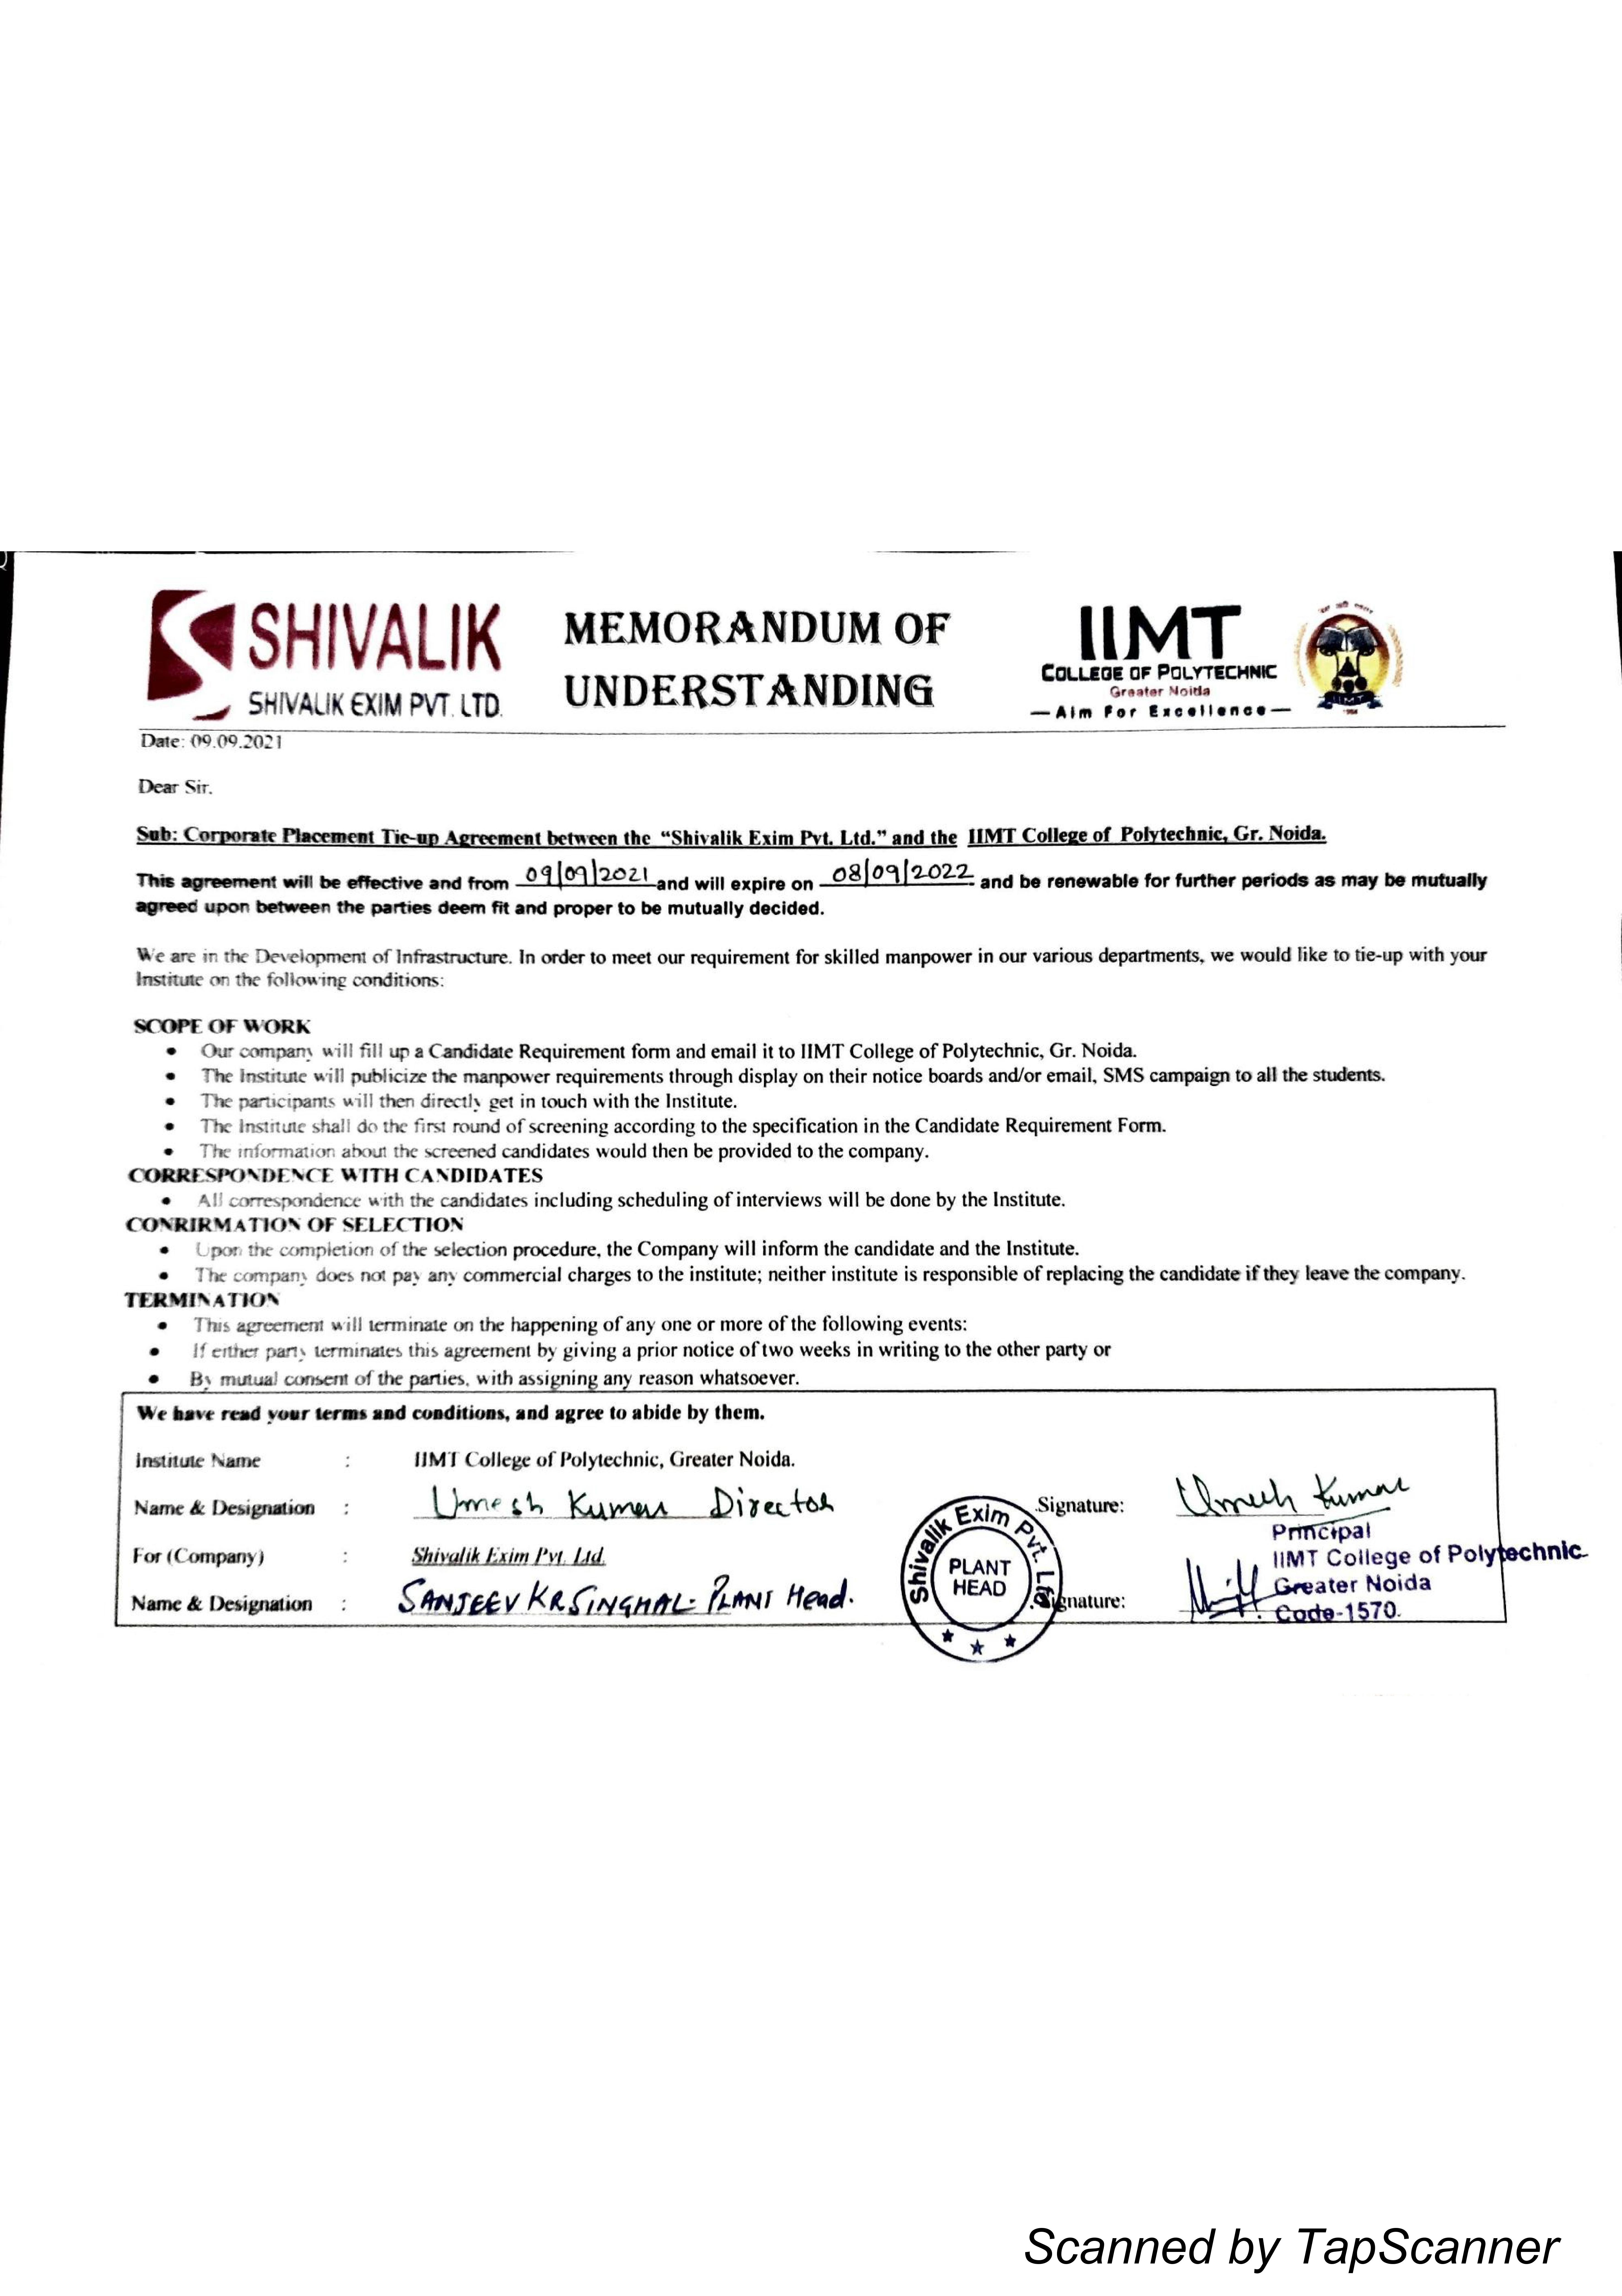 MOU Signed Between IIMT College of Polytechnic and Shivalik Exim Private Limited